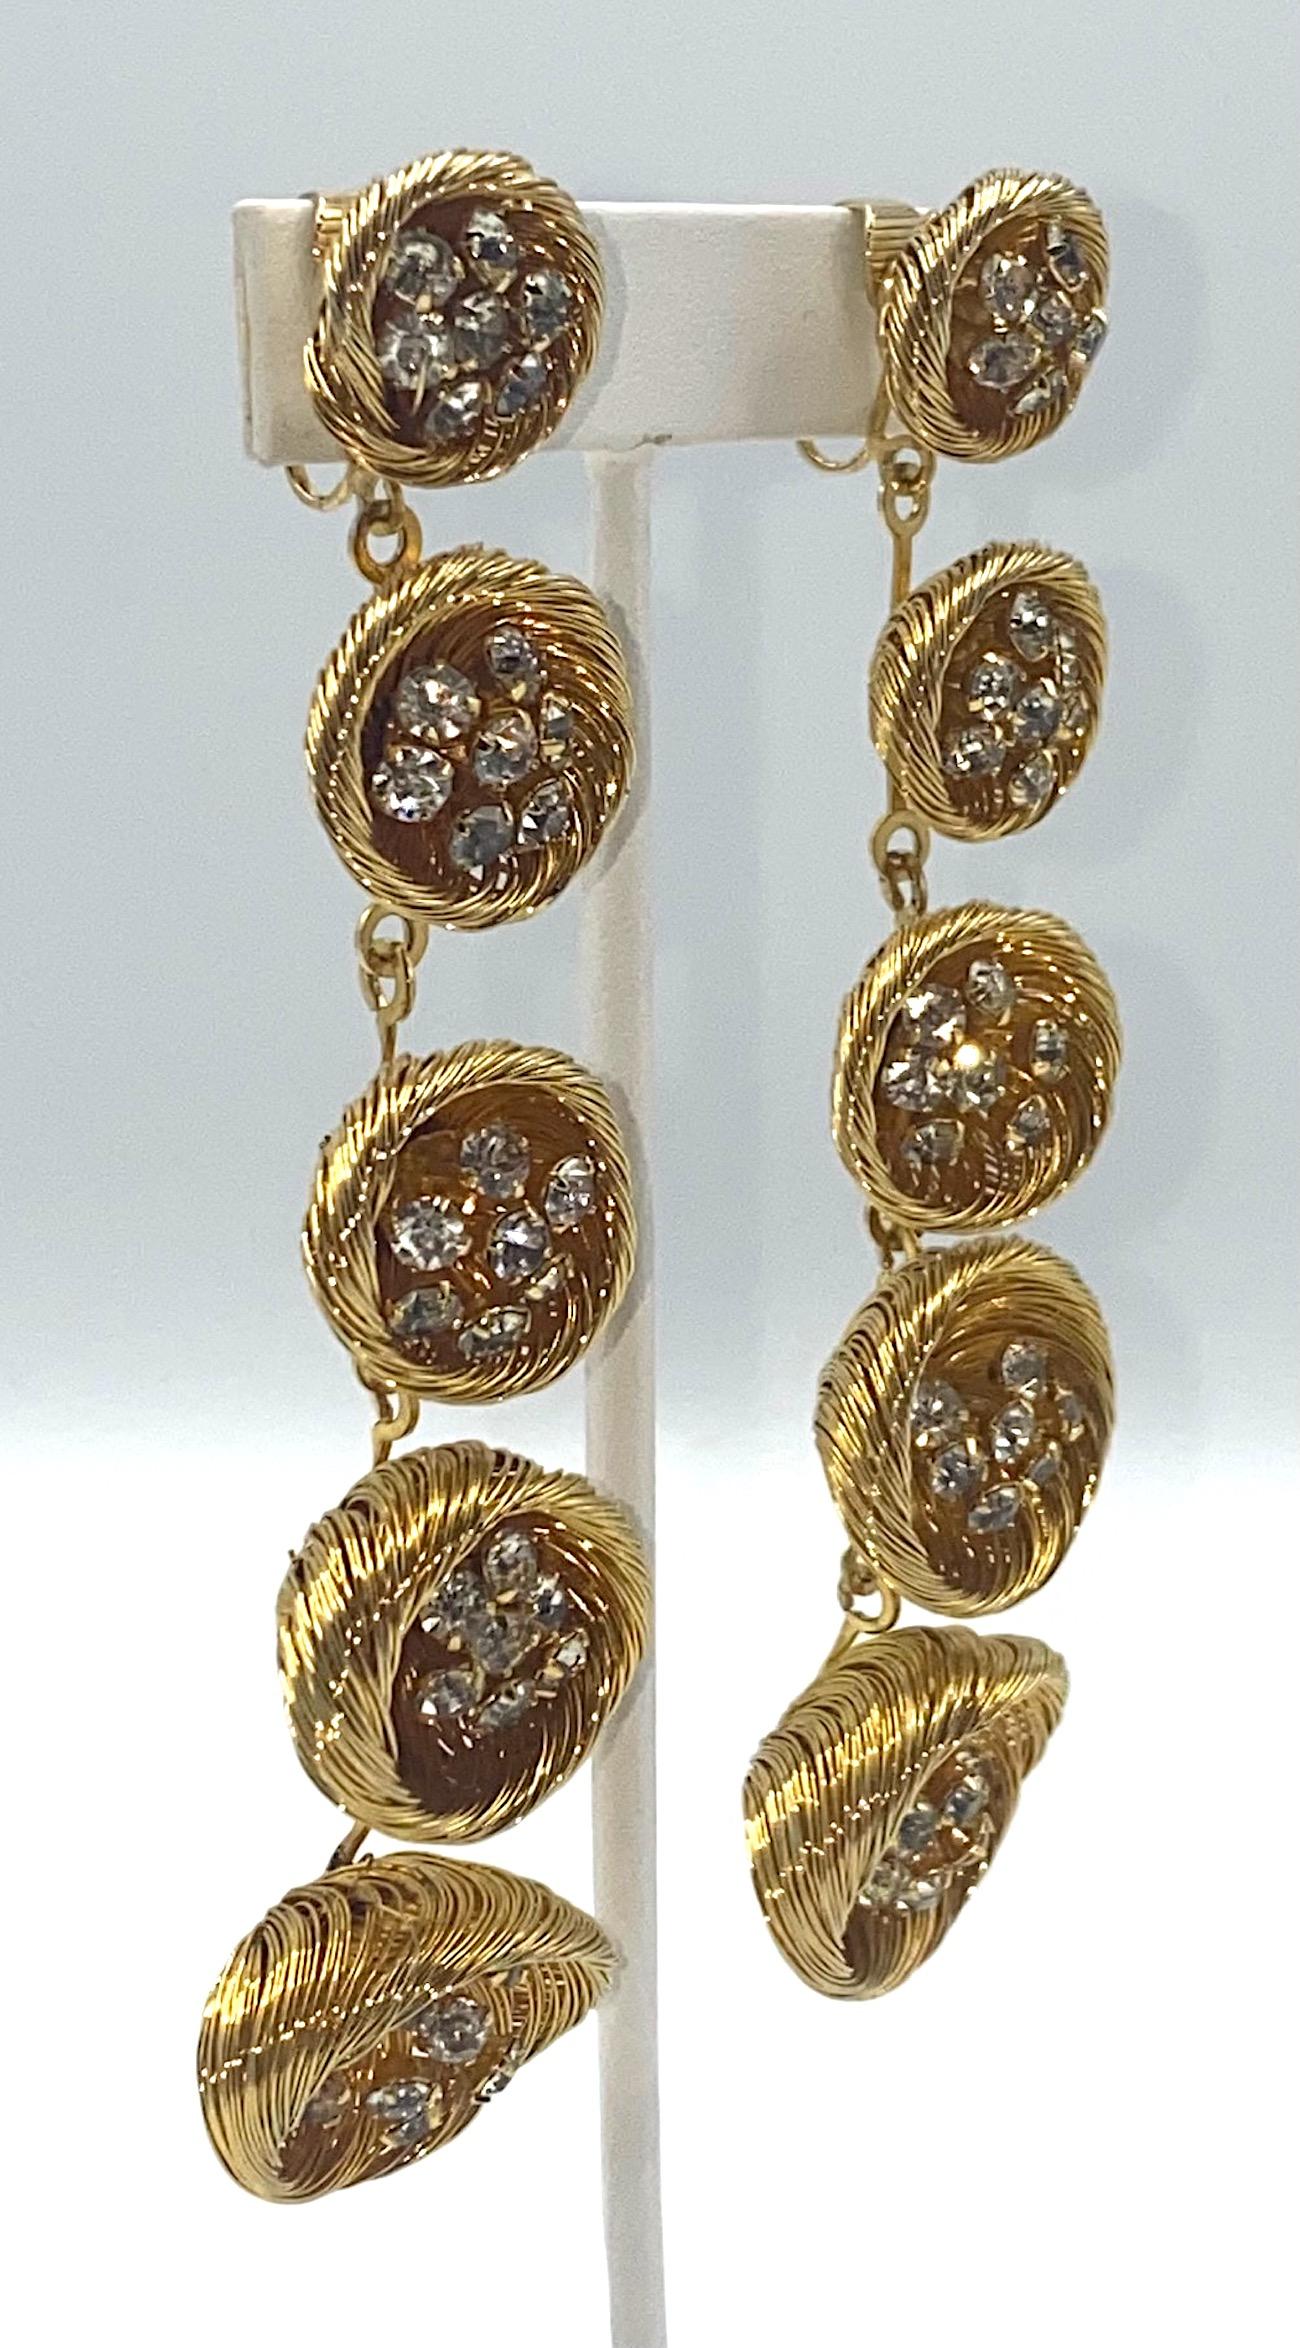 A stunning and unique pair of lat 1950s to mid 1960s hand made long Mod pendant earrings. Each pair is comprised of five hand woven gold tone wire cups graduating from smaller to larger from top to bottom. Each woven cup has little clusters of wire